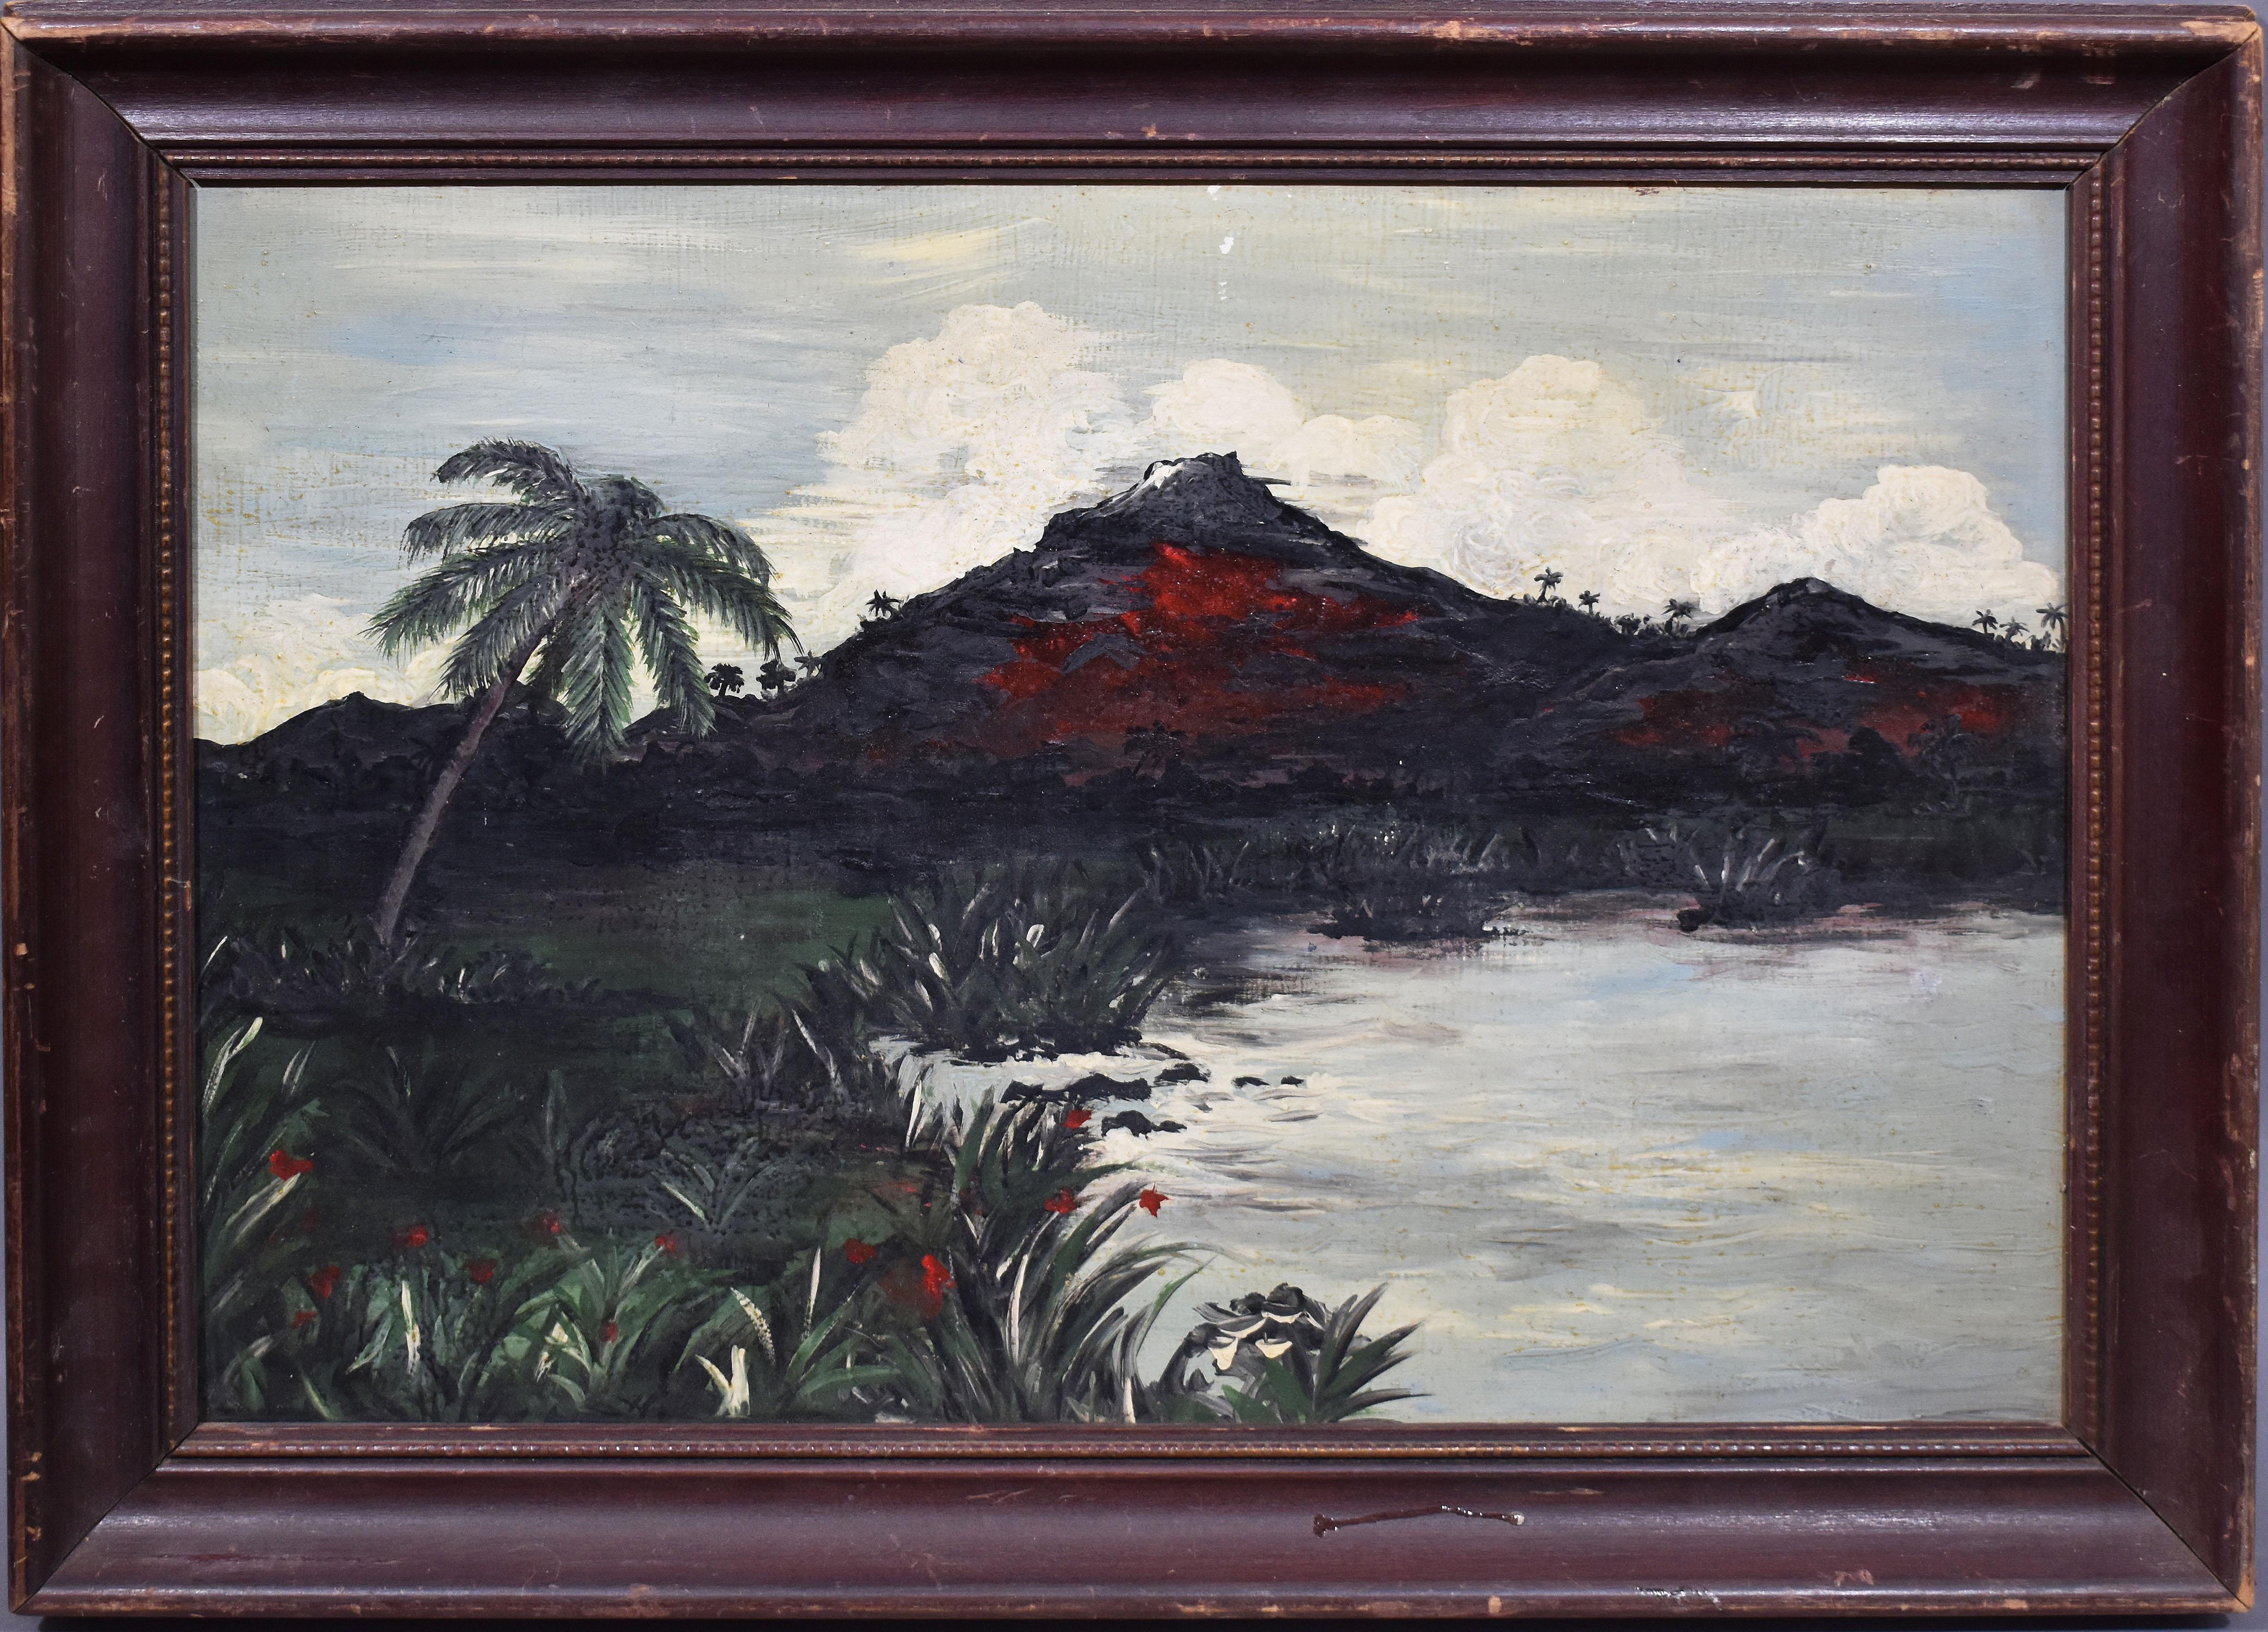 Antique modernist painting of British New Guinea.  Oil on board, circa 1945.  Signed on verso.  Displayed in a period  frame.  Image size, 20